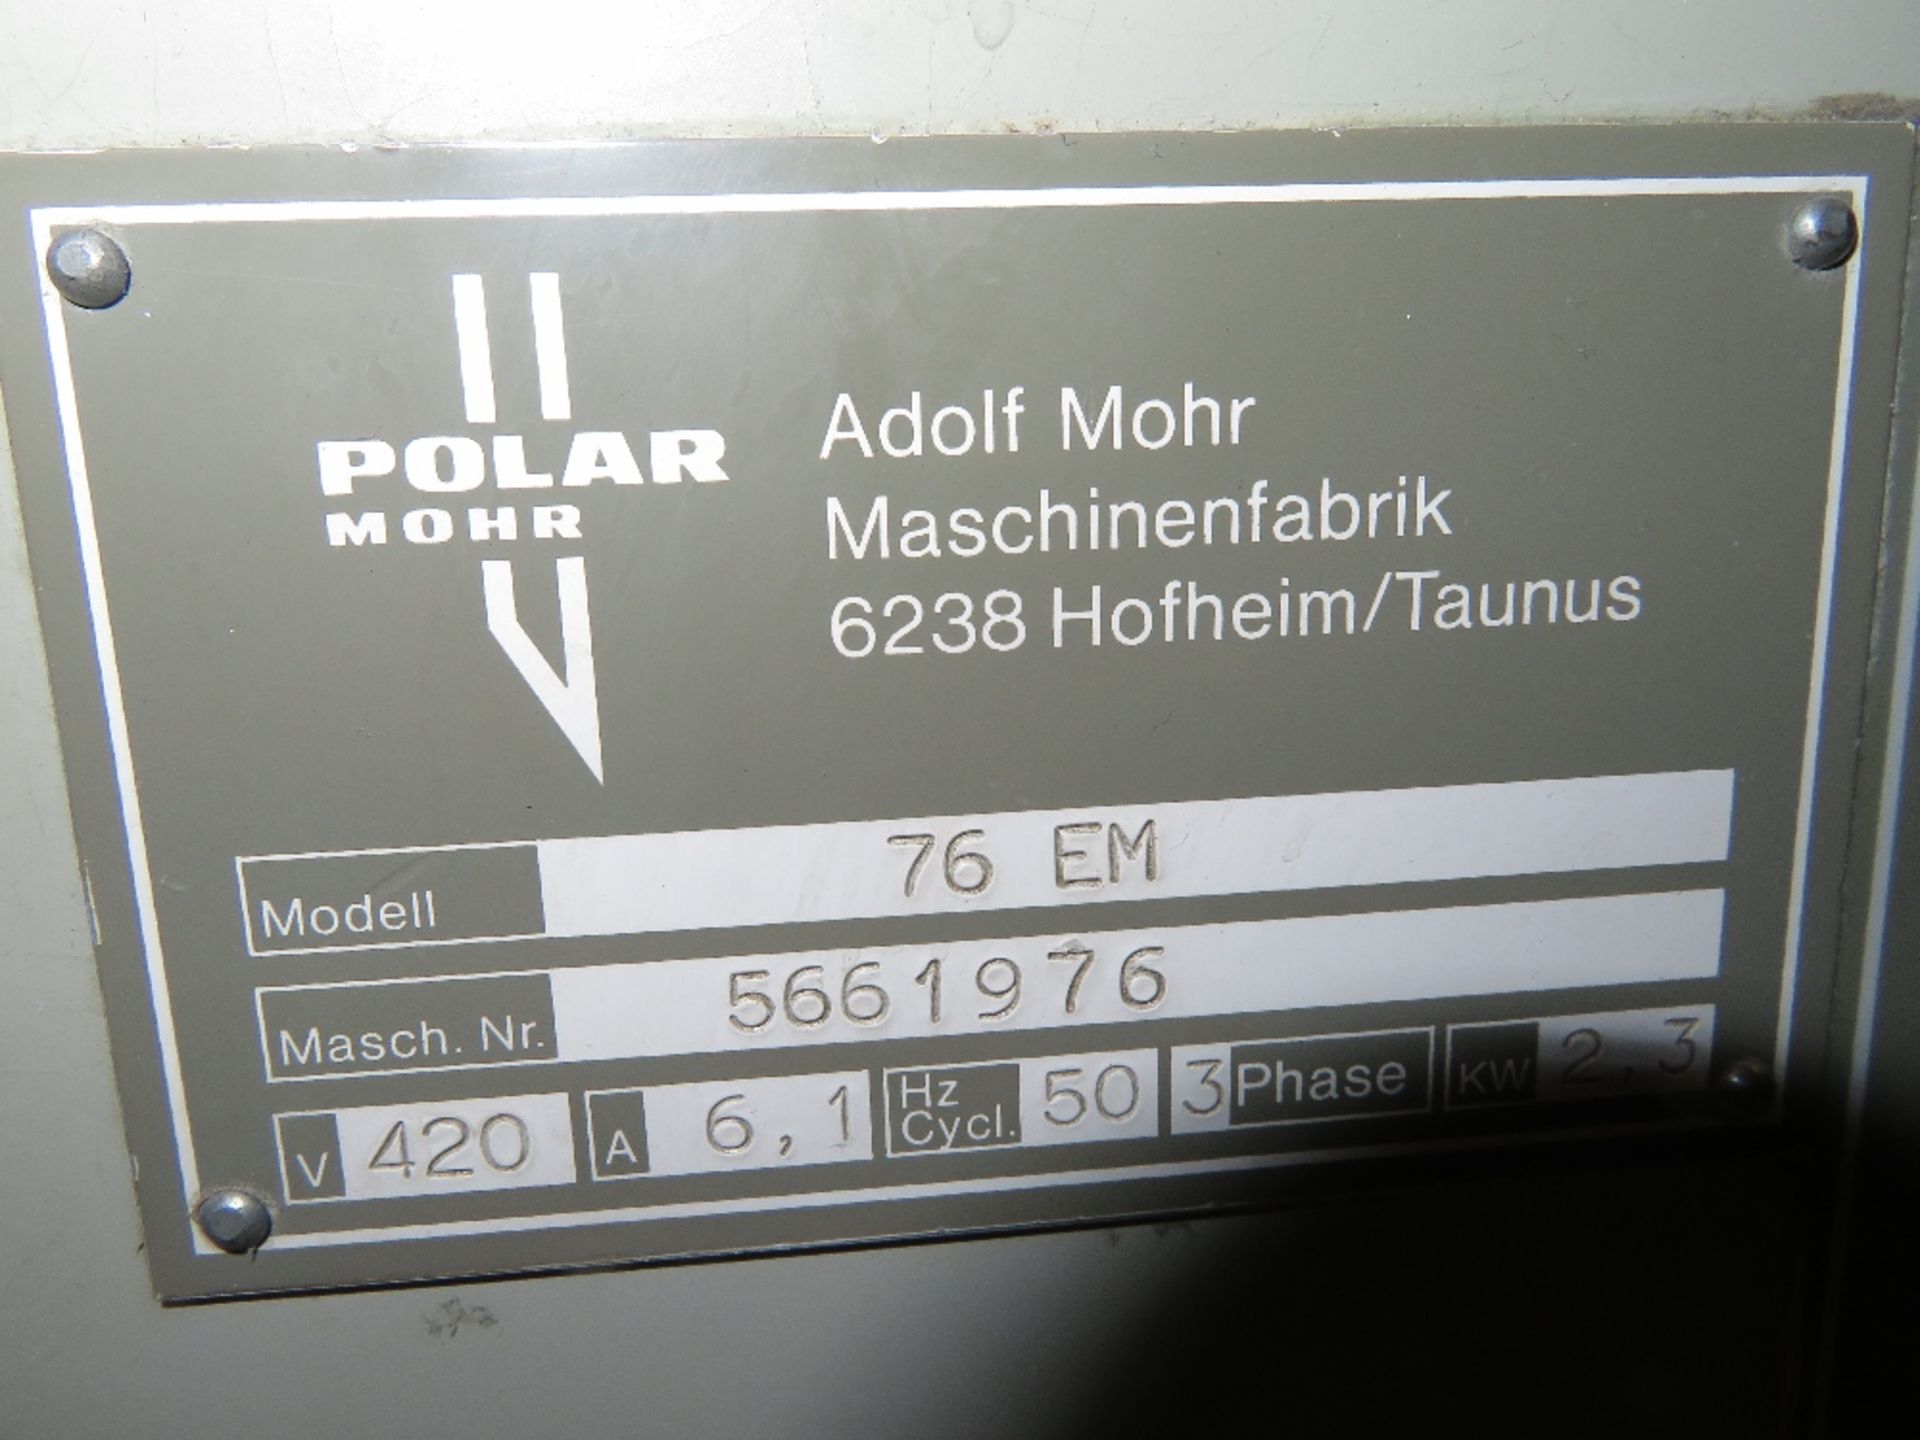 Polar Mohr 76 EM Paper Guillotine, Serial Number 5661976 with Light Guards and 4x Spare Blades - Image 5 of 8